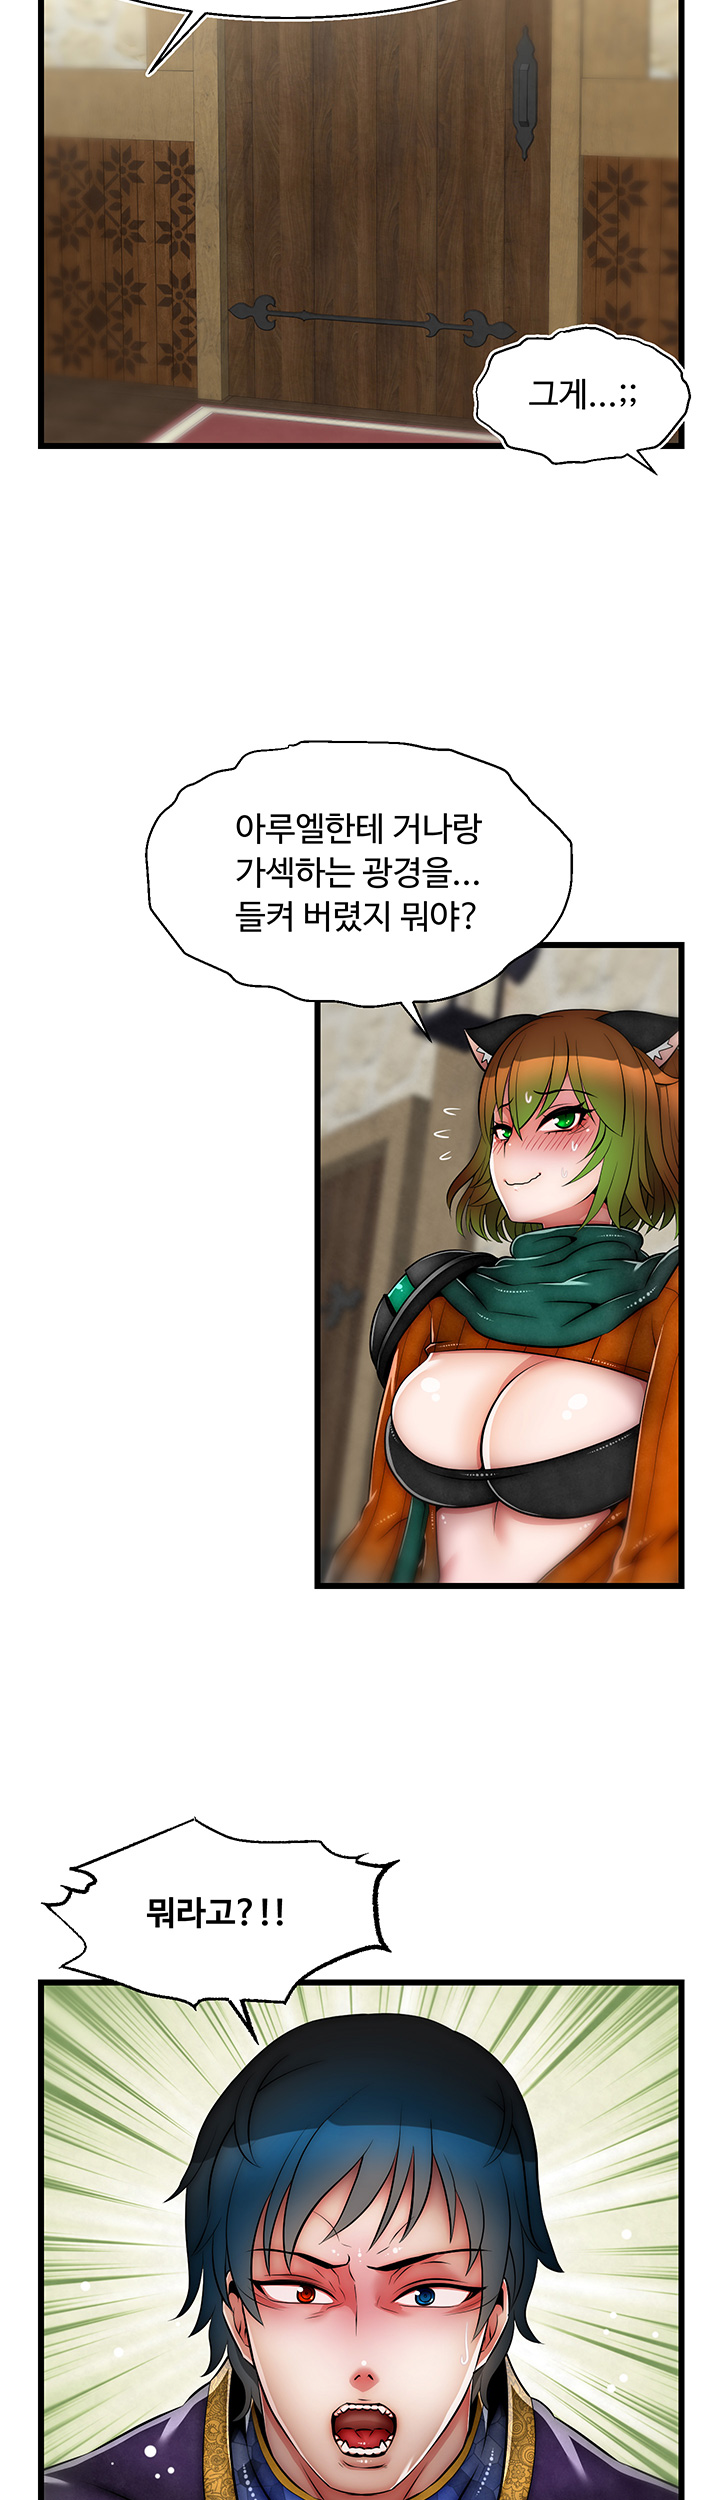 Ssappossible Elf RAW - Chapter 15 Page 15